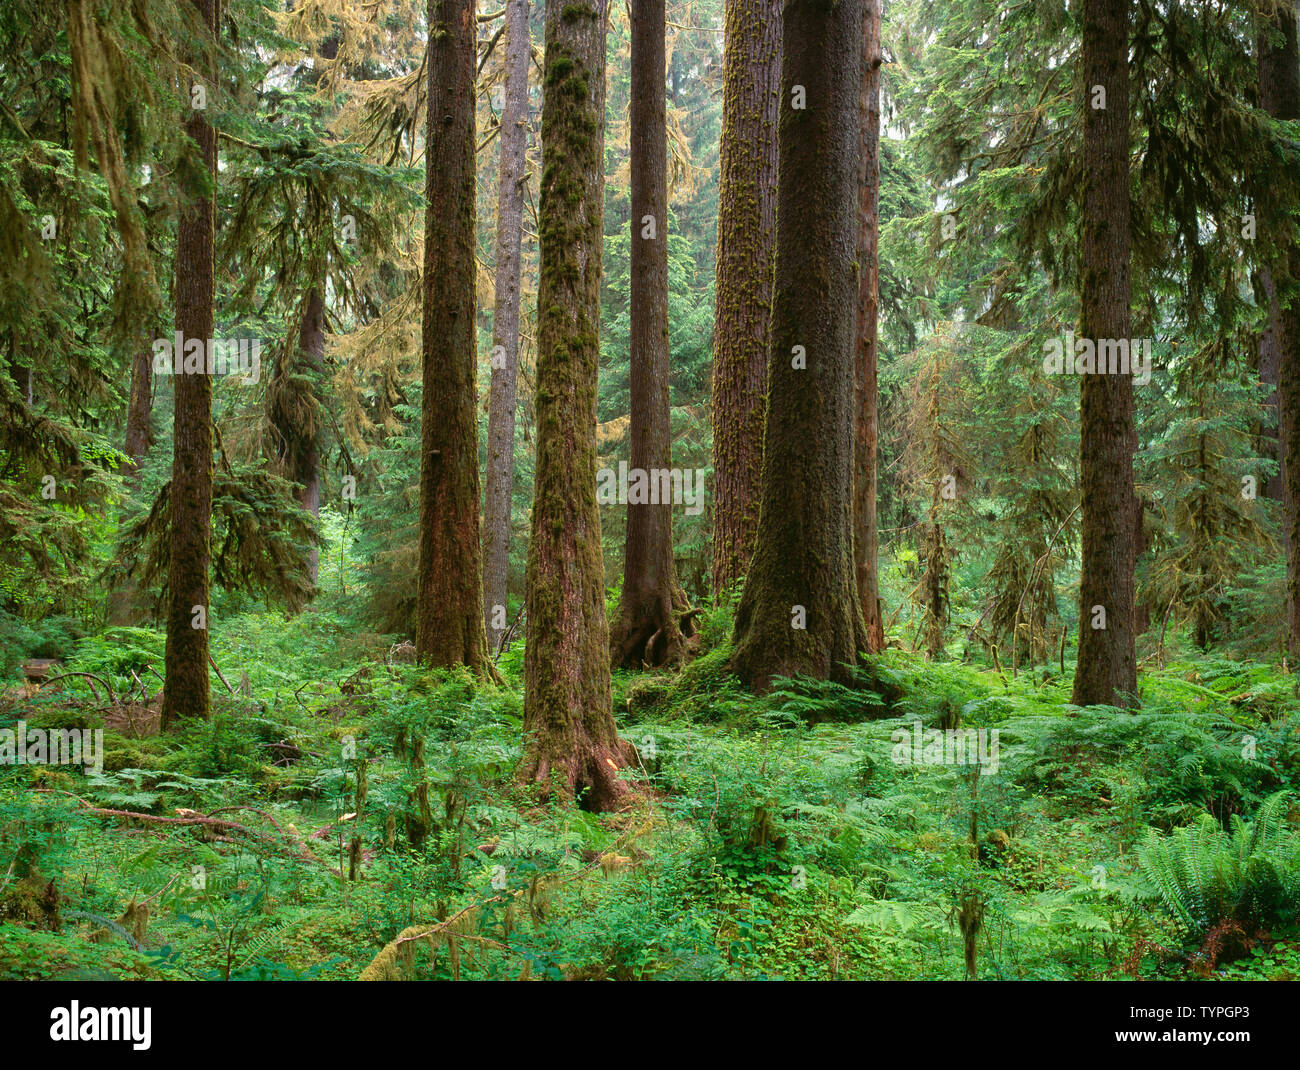 USA, Washington, Olympic National Park, Sitka spruce and western hemlock in temperate rain forest; Hoh Valley. Stock Photo